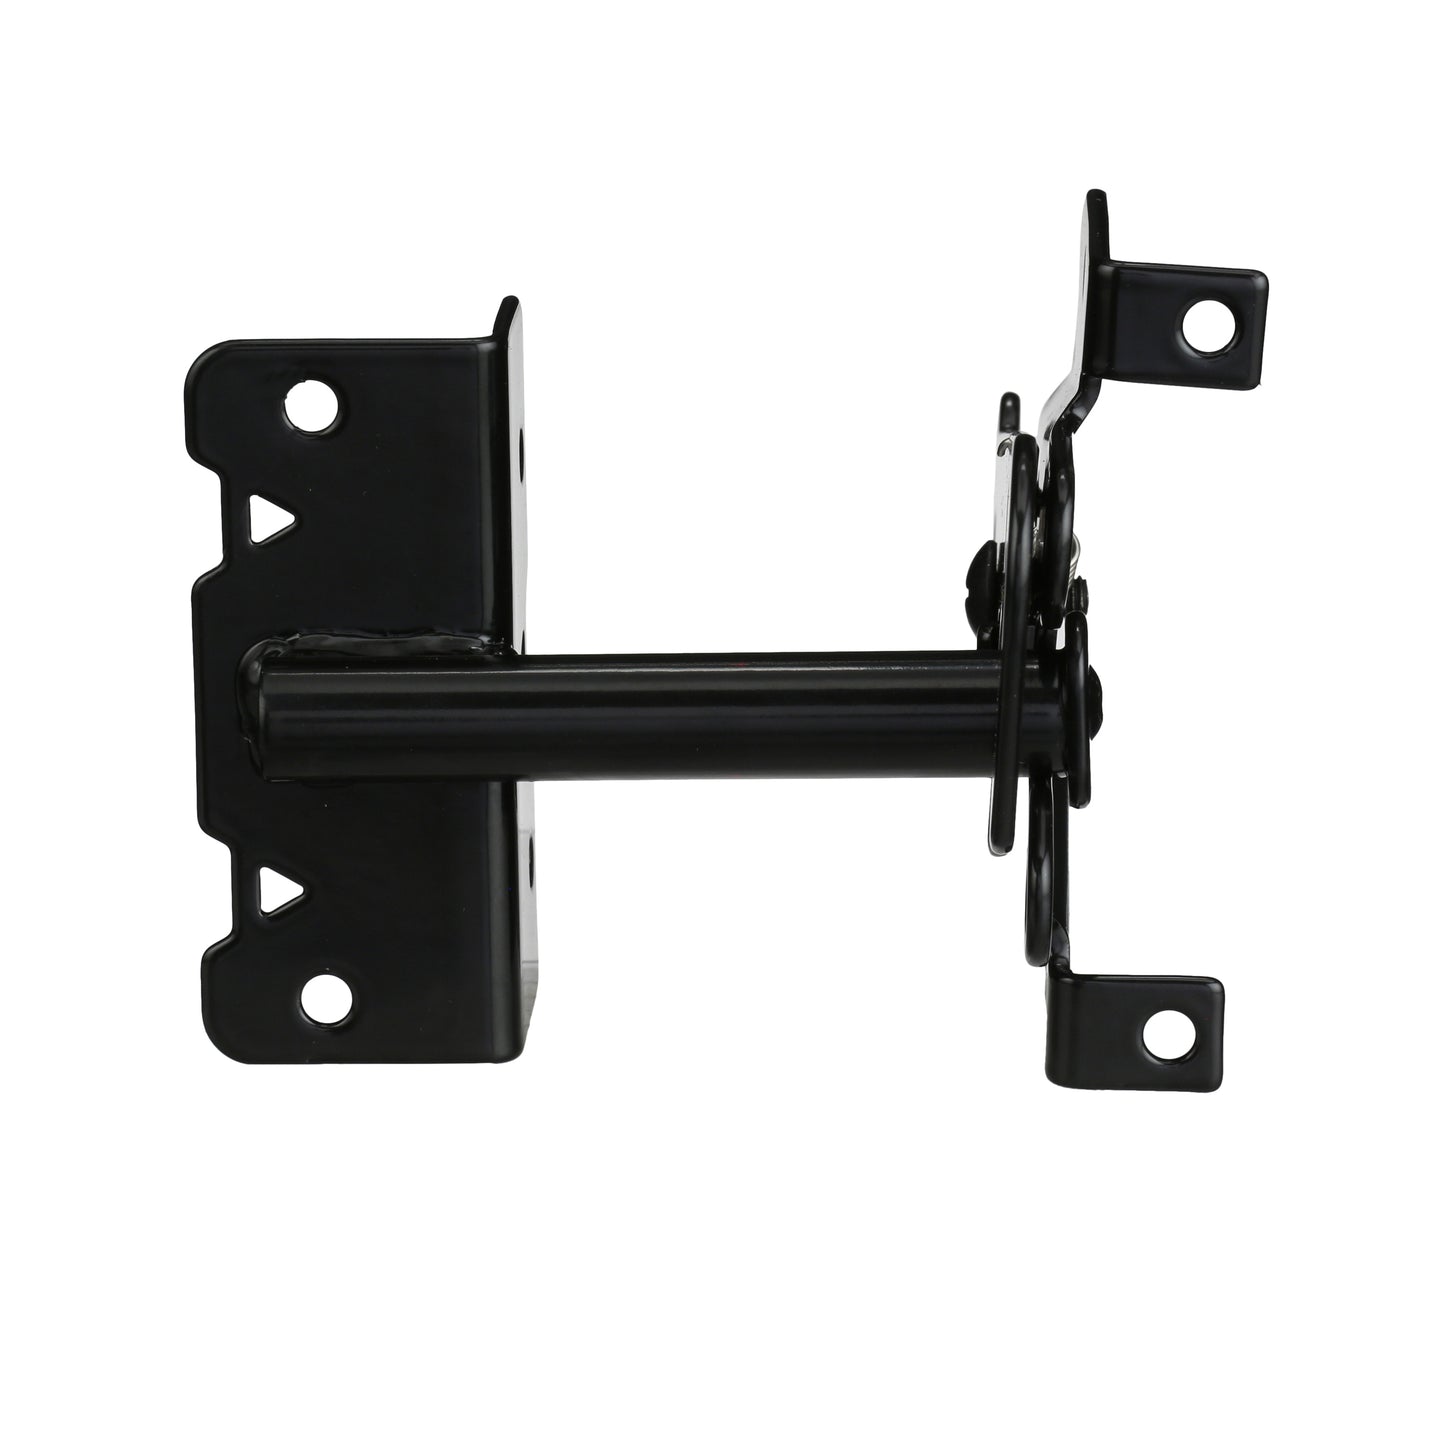 Stainless Steel Self-closing Latch with Stop Washer